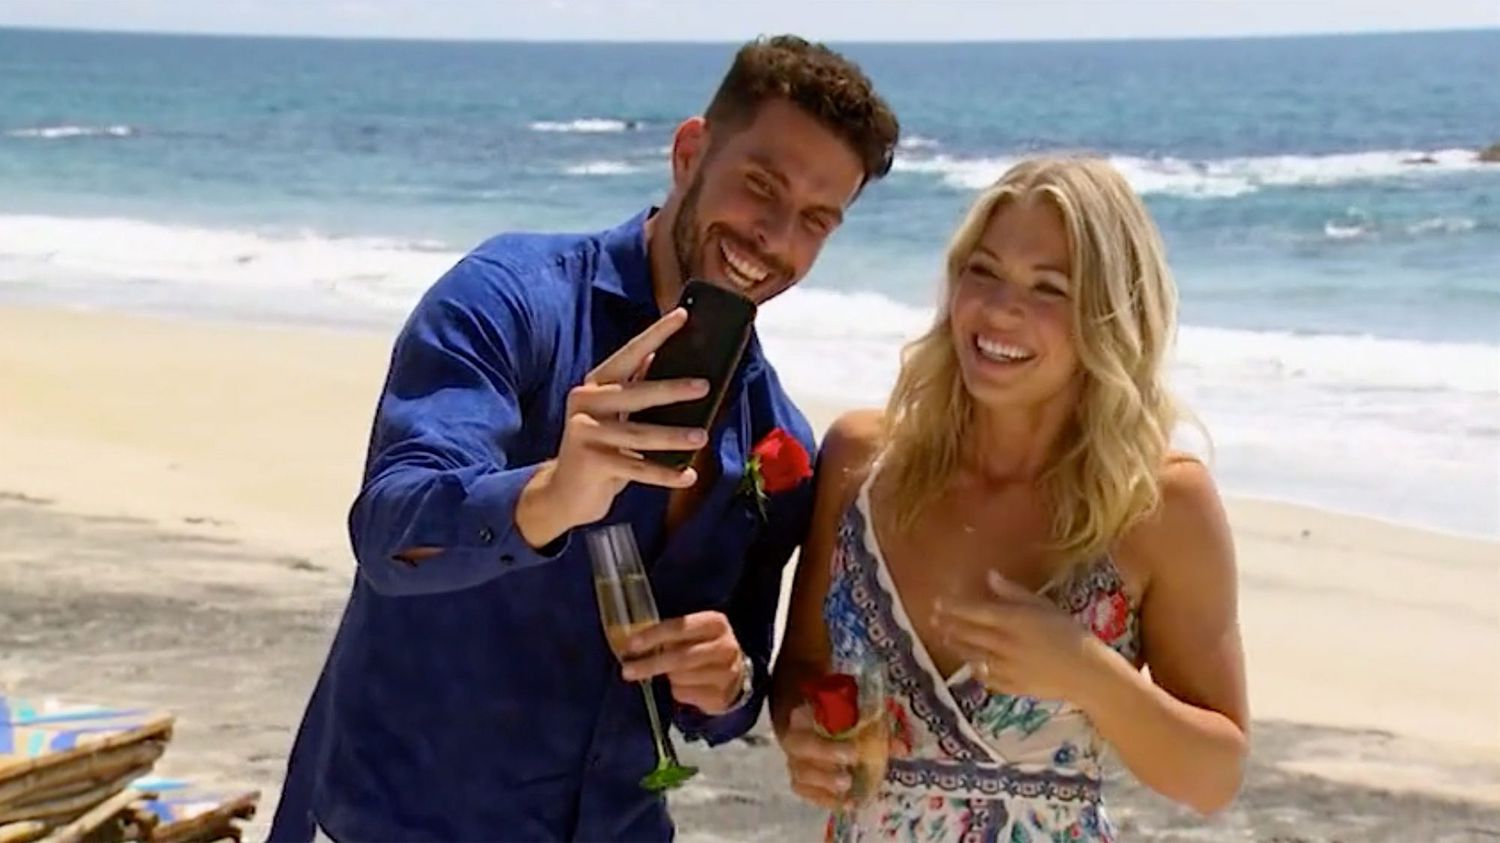 Bachelor in Paradise recapCredit: ABC